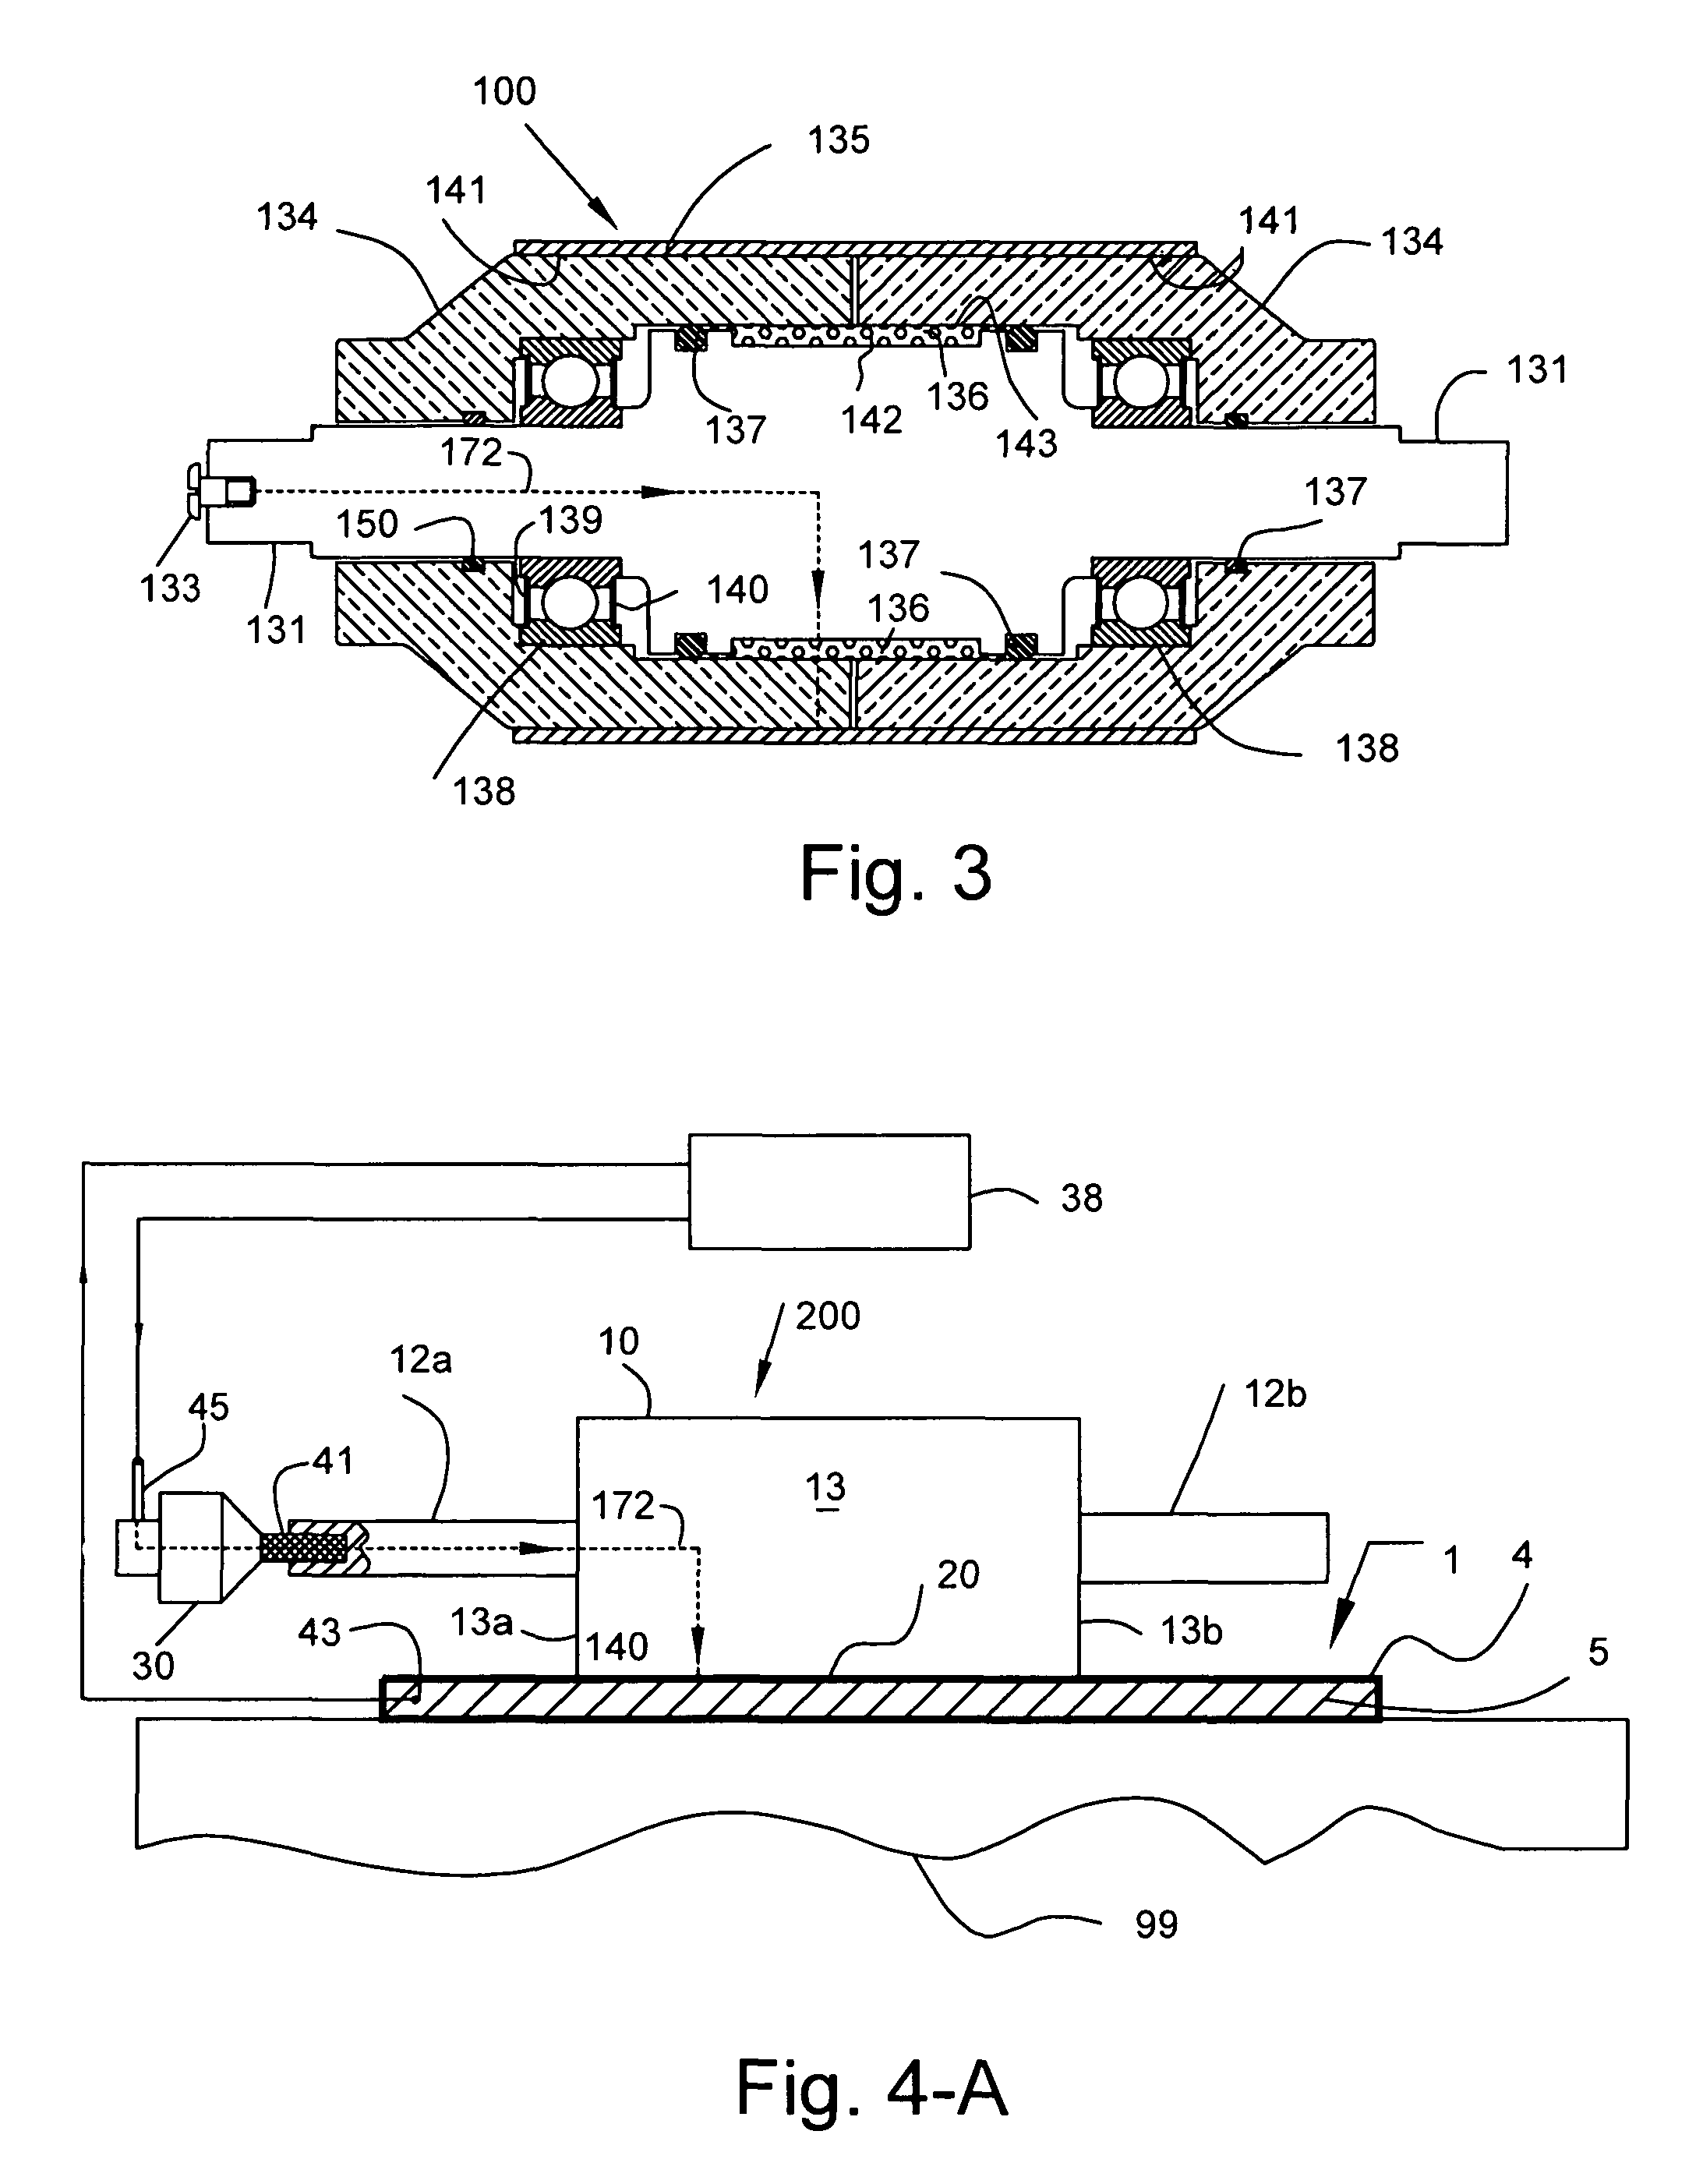 Apparatus for measuring insulation characteristics of coated steel sheet